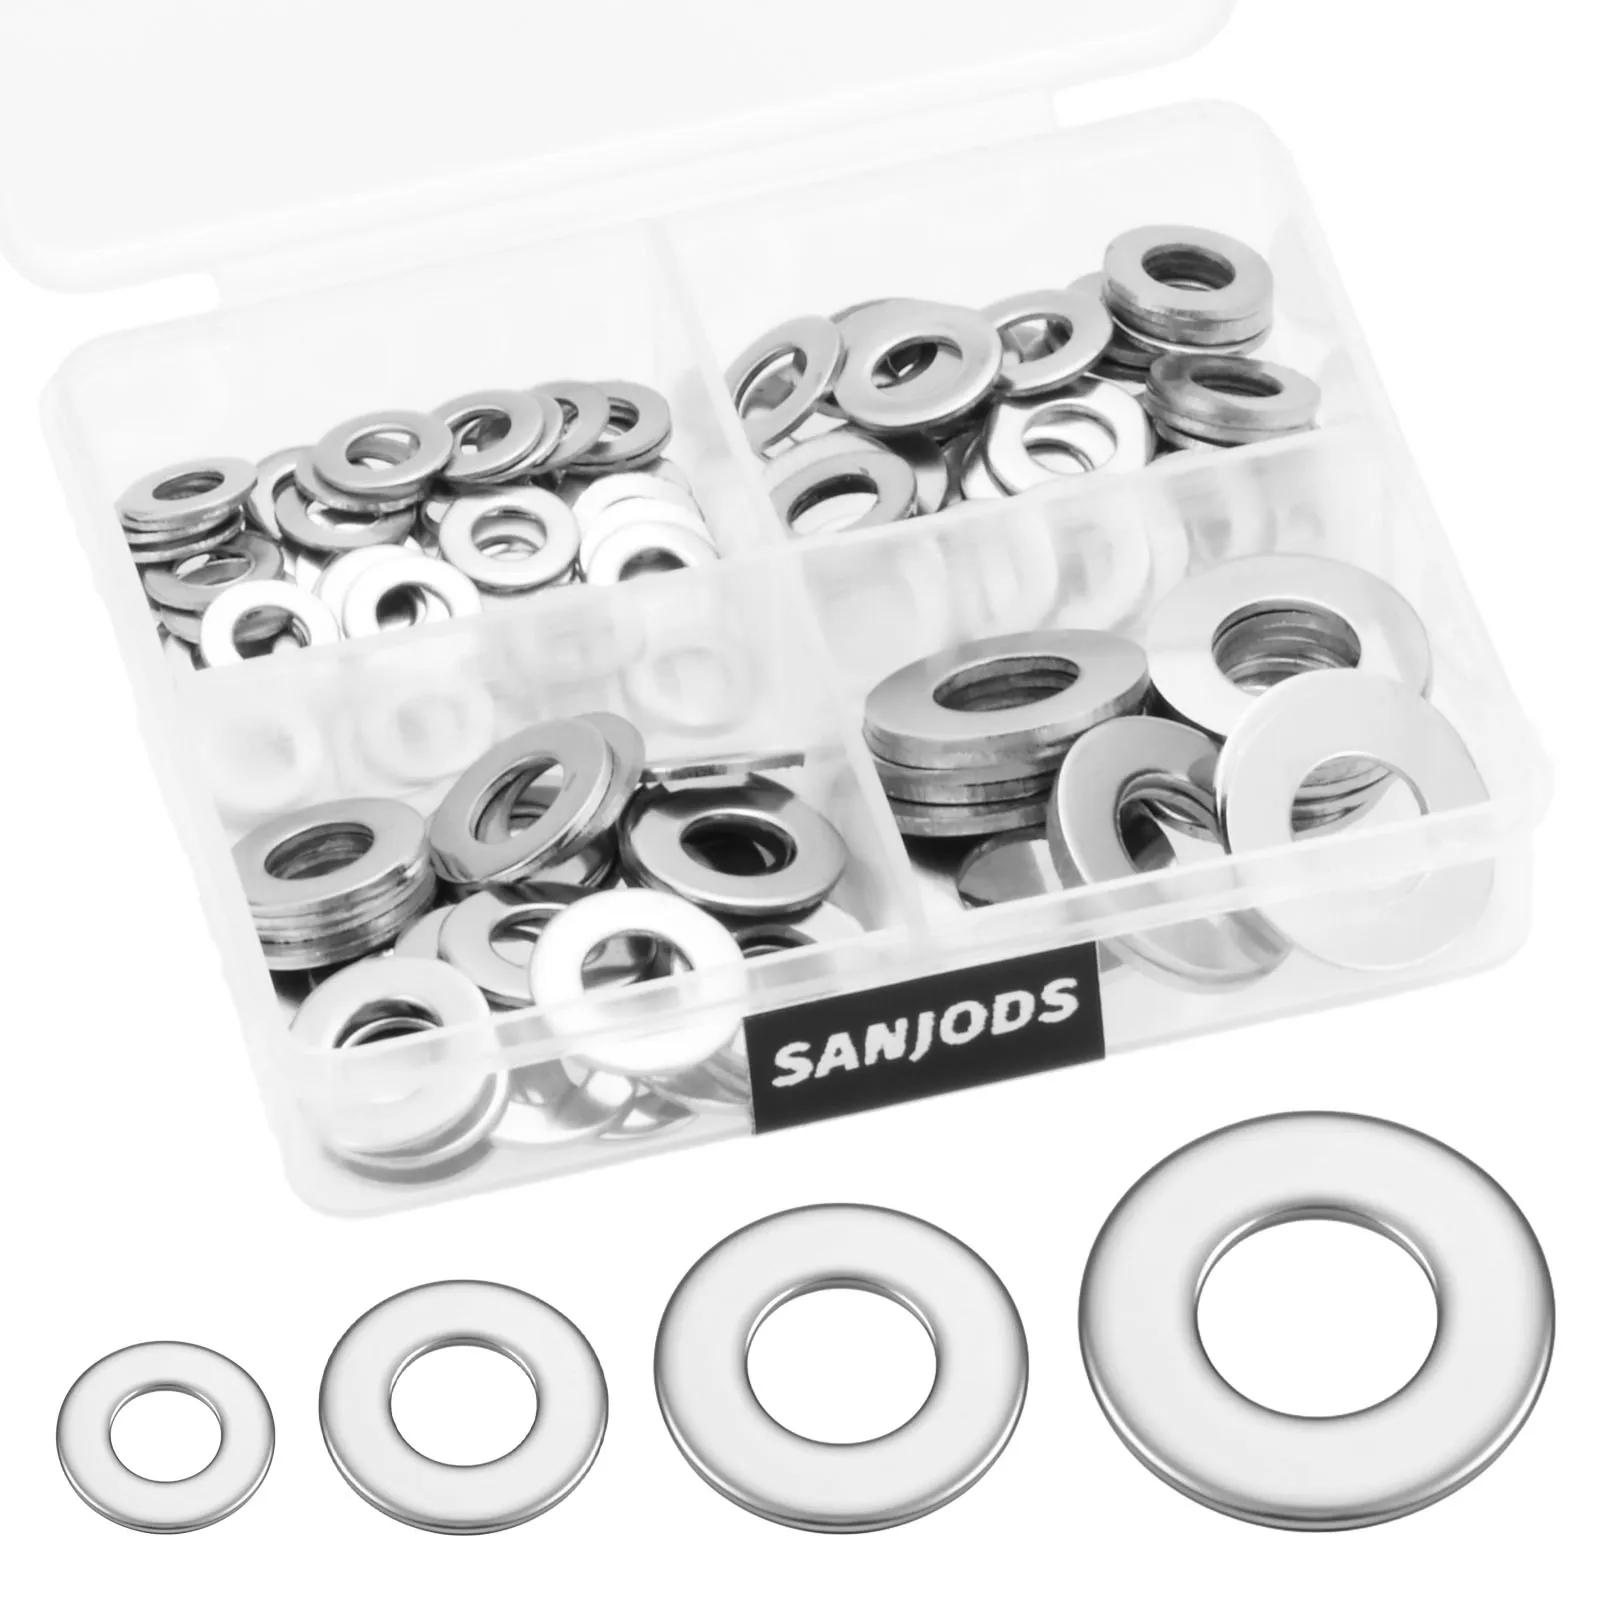 95Pcs Stainless Steel Flat Washers for Screws Bolts, M4 M5 M6 M8 Washers Assortment Set, Assorted Lock Metal Washers Kit DIN125